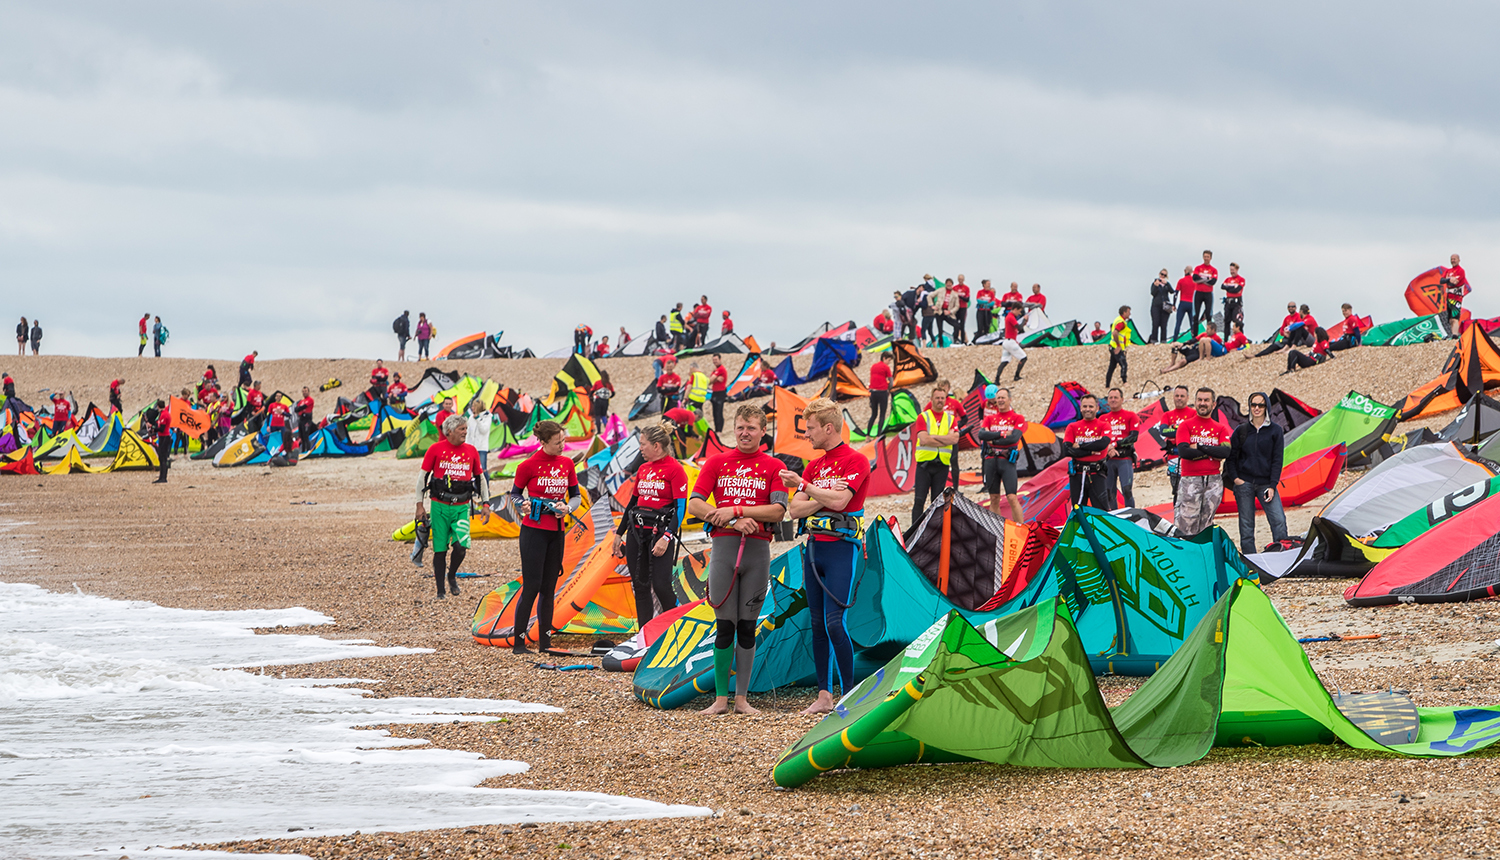 2018 Events in Hampshire - Kite Surfing Event on Hayling Island Beach